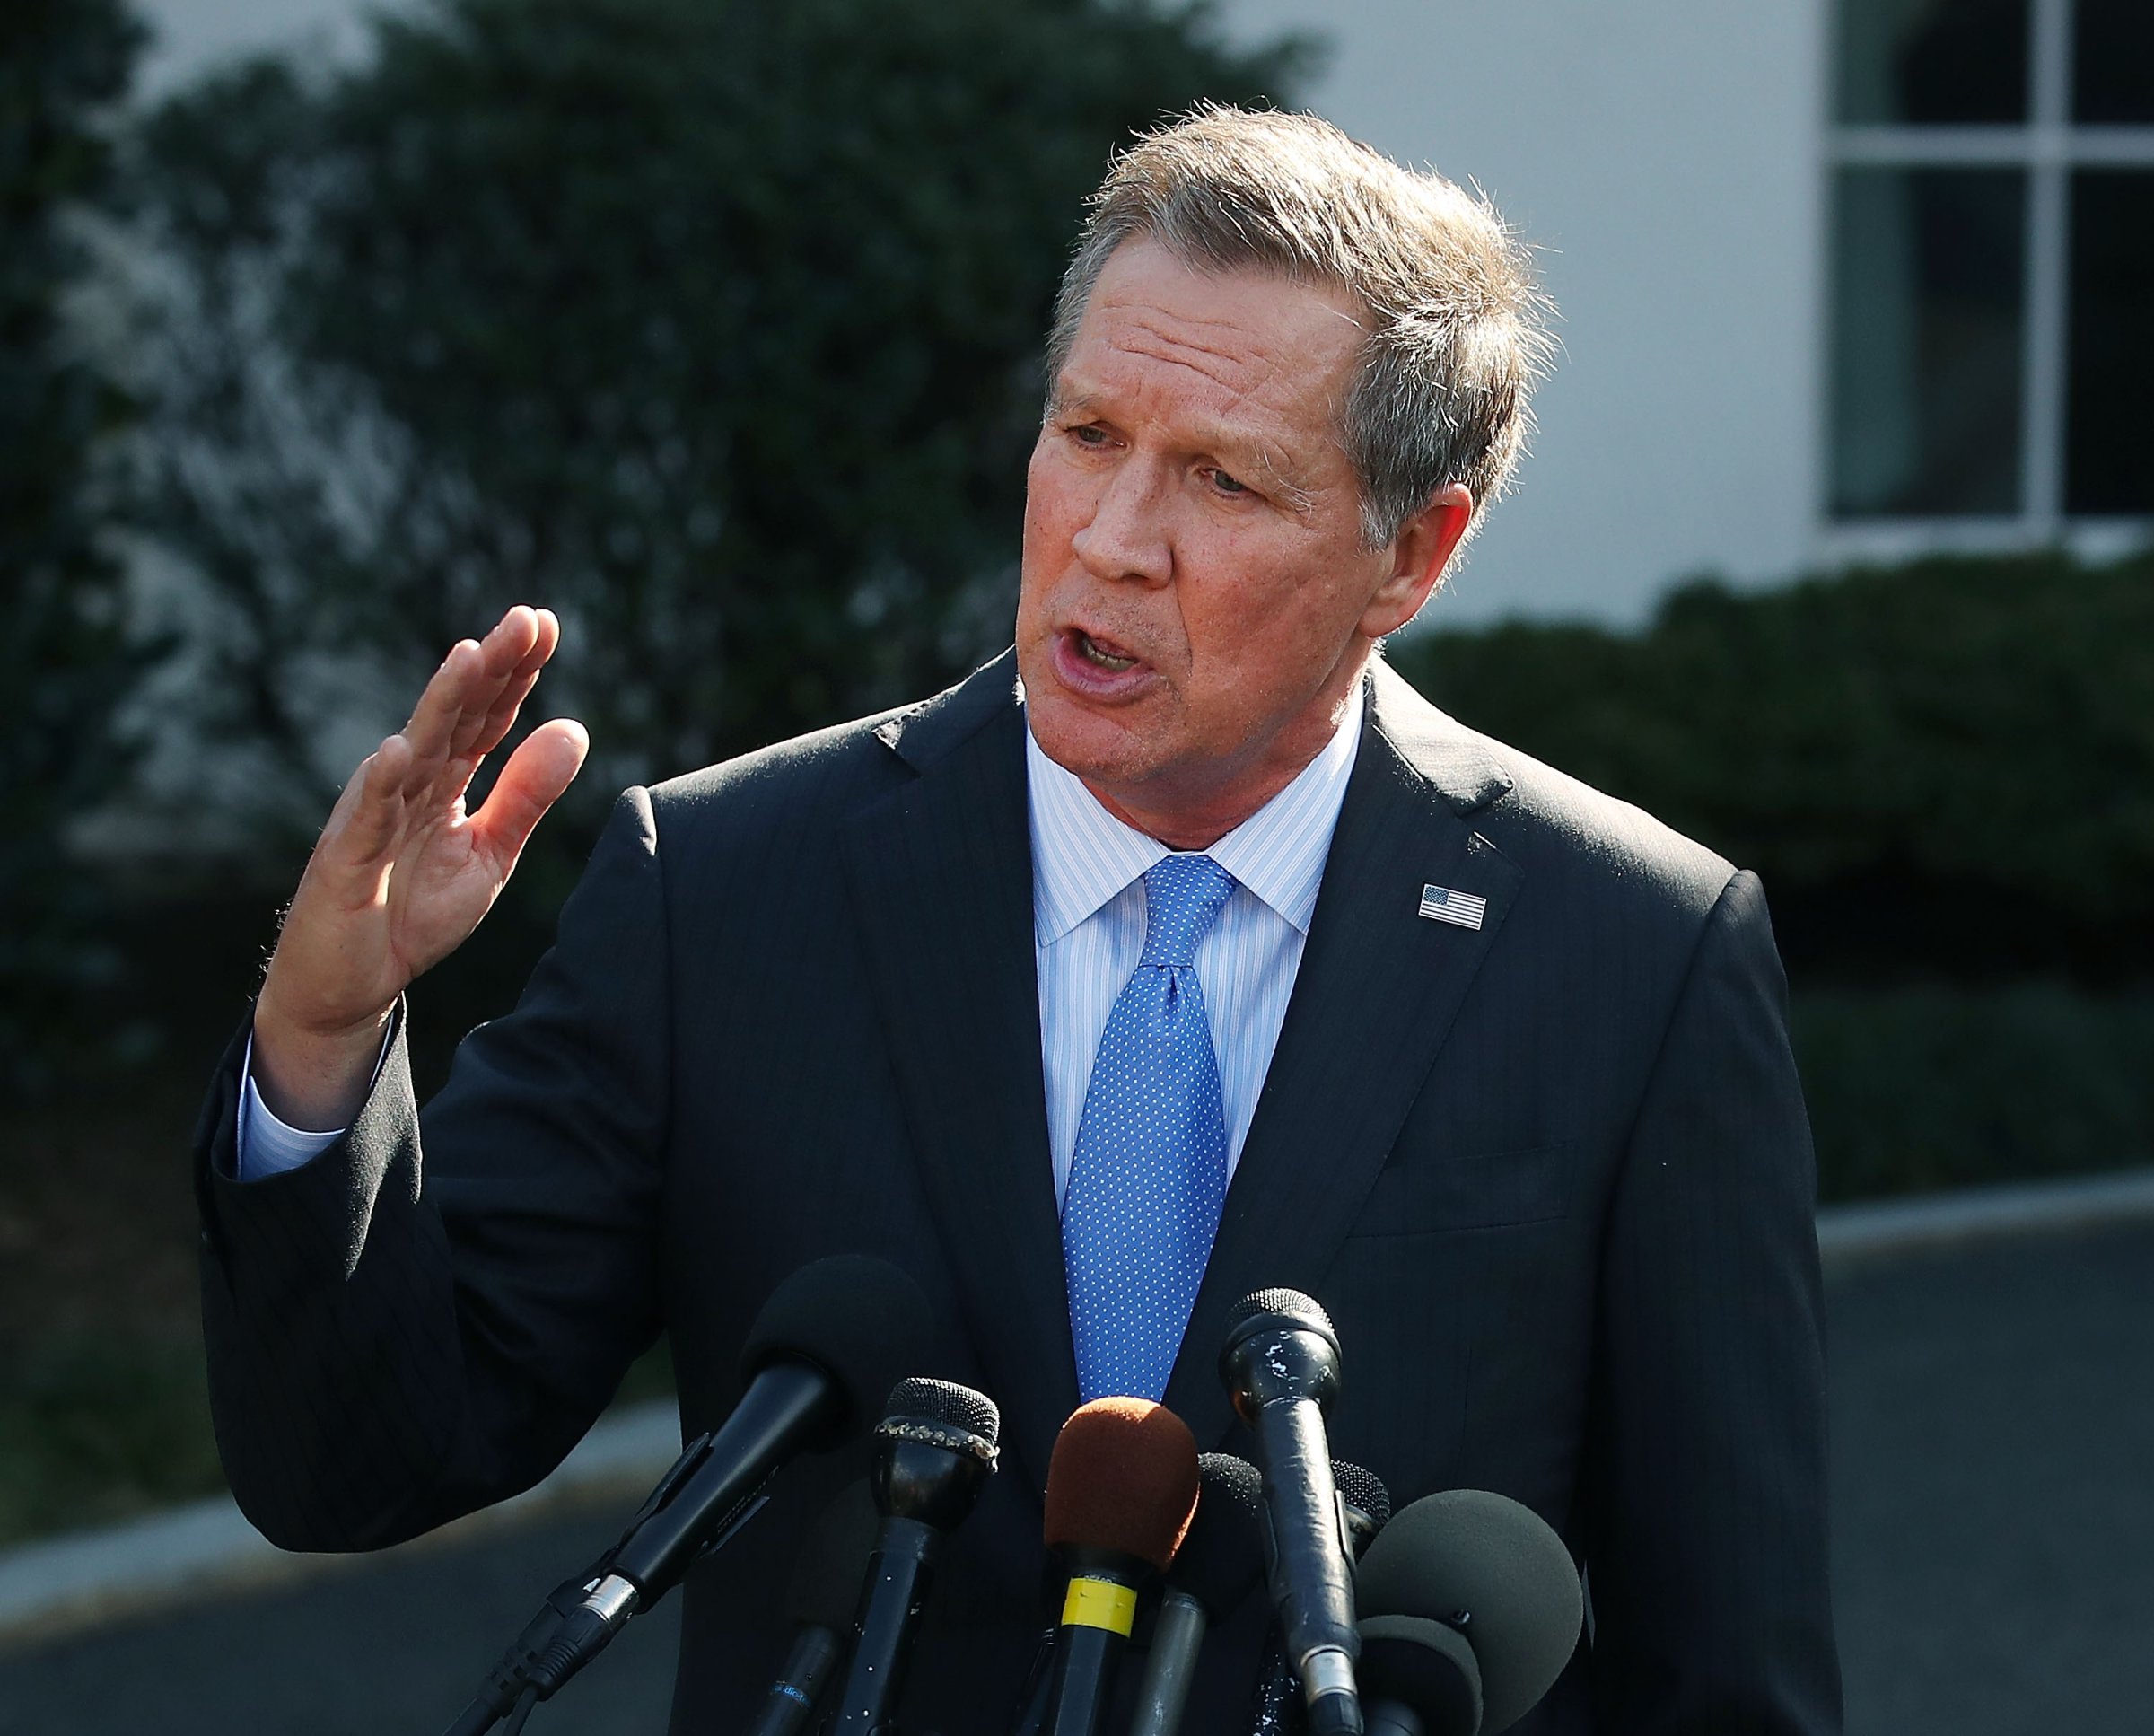 Ohio Governor John Kasich speaks to reporters after a closed meeting with U.S. President Donald Trump, on Feb. 24, 2017 in Washington, D.C.